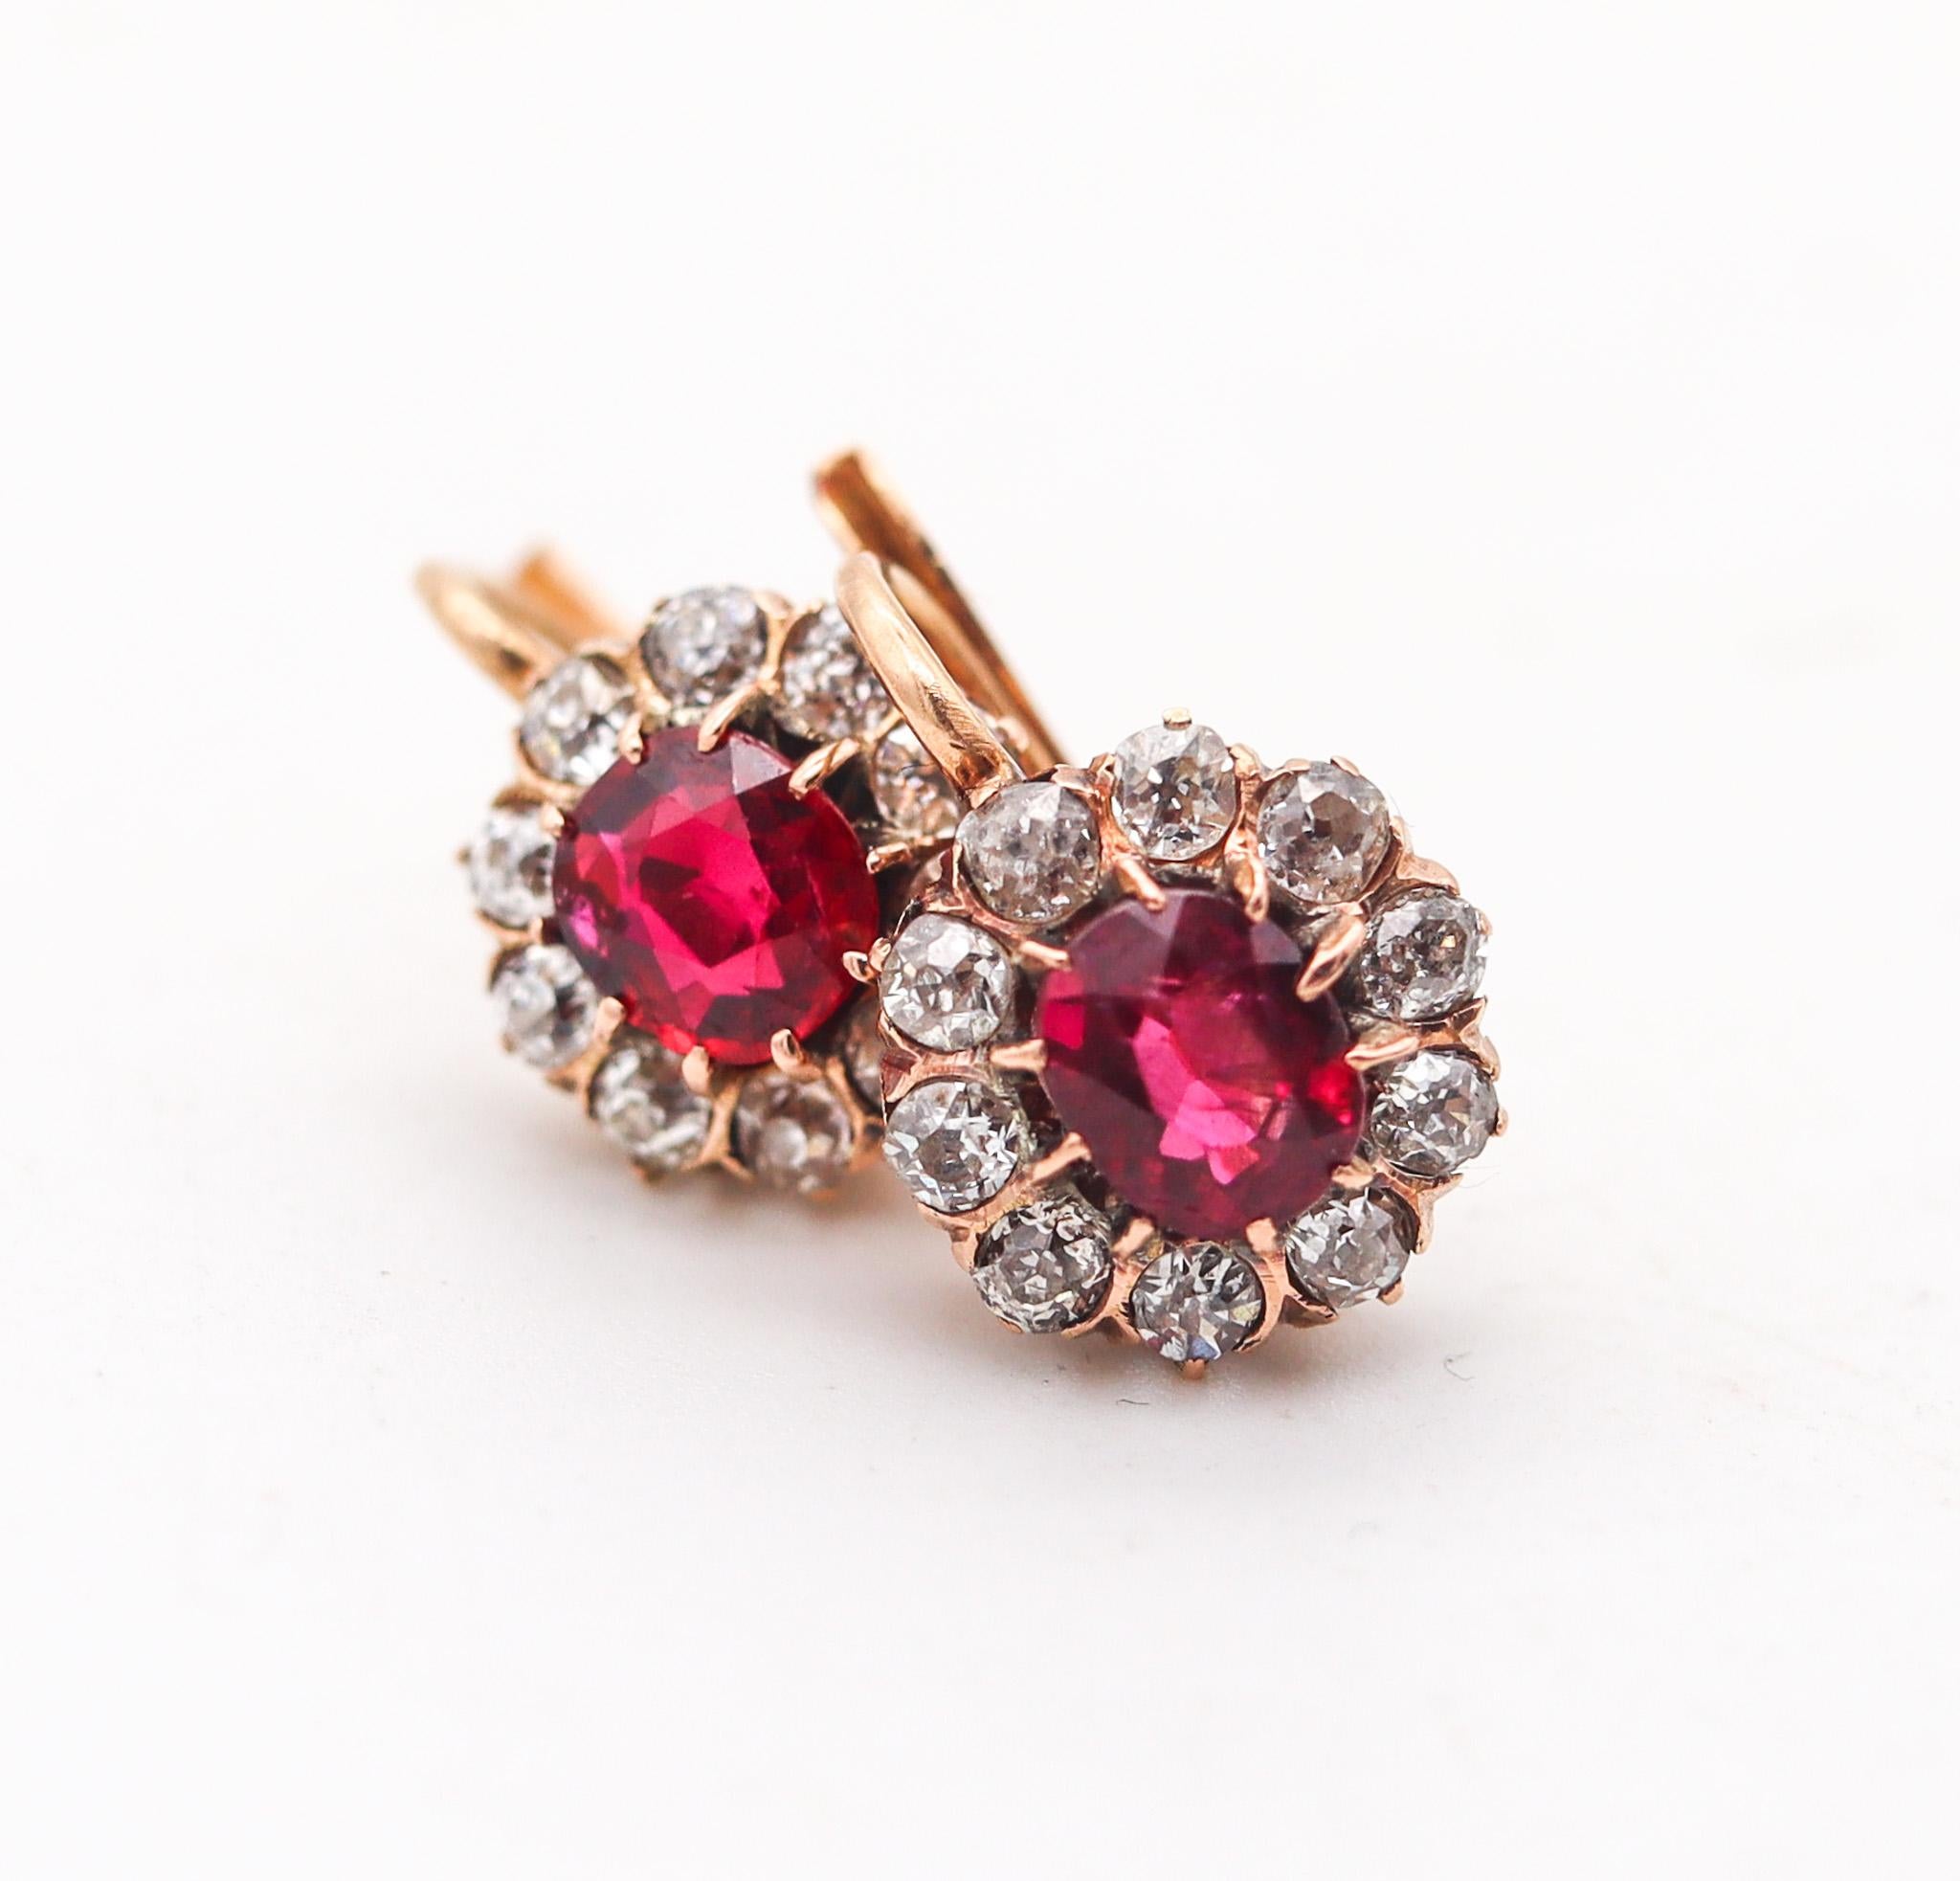 Women's Edwardian 1905 Antique French Earrings 18Kt Gold With 3.54 Ctw Diamonds & Rubies For Sale